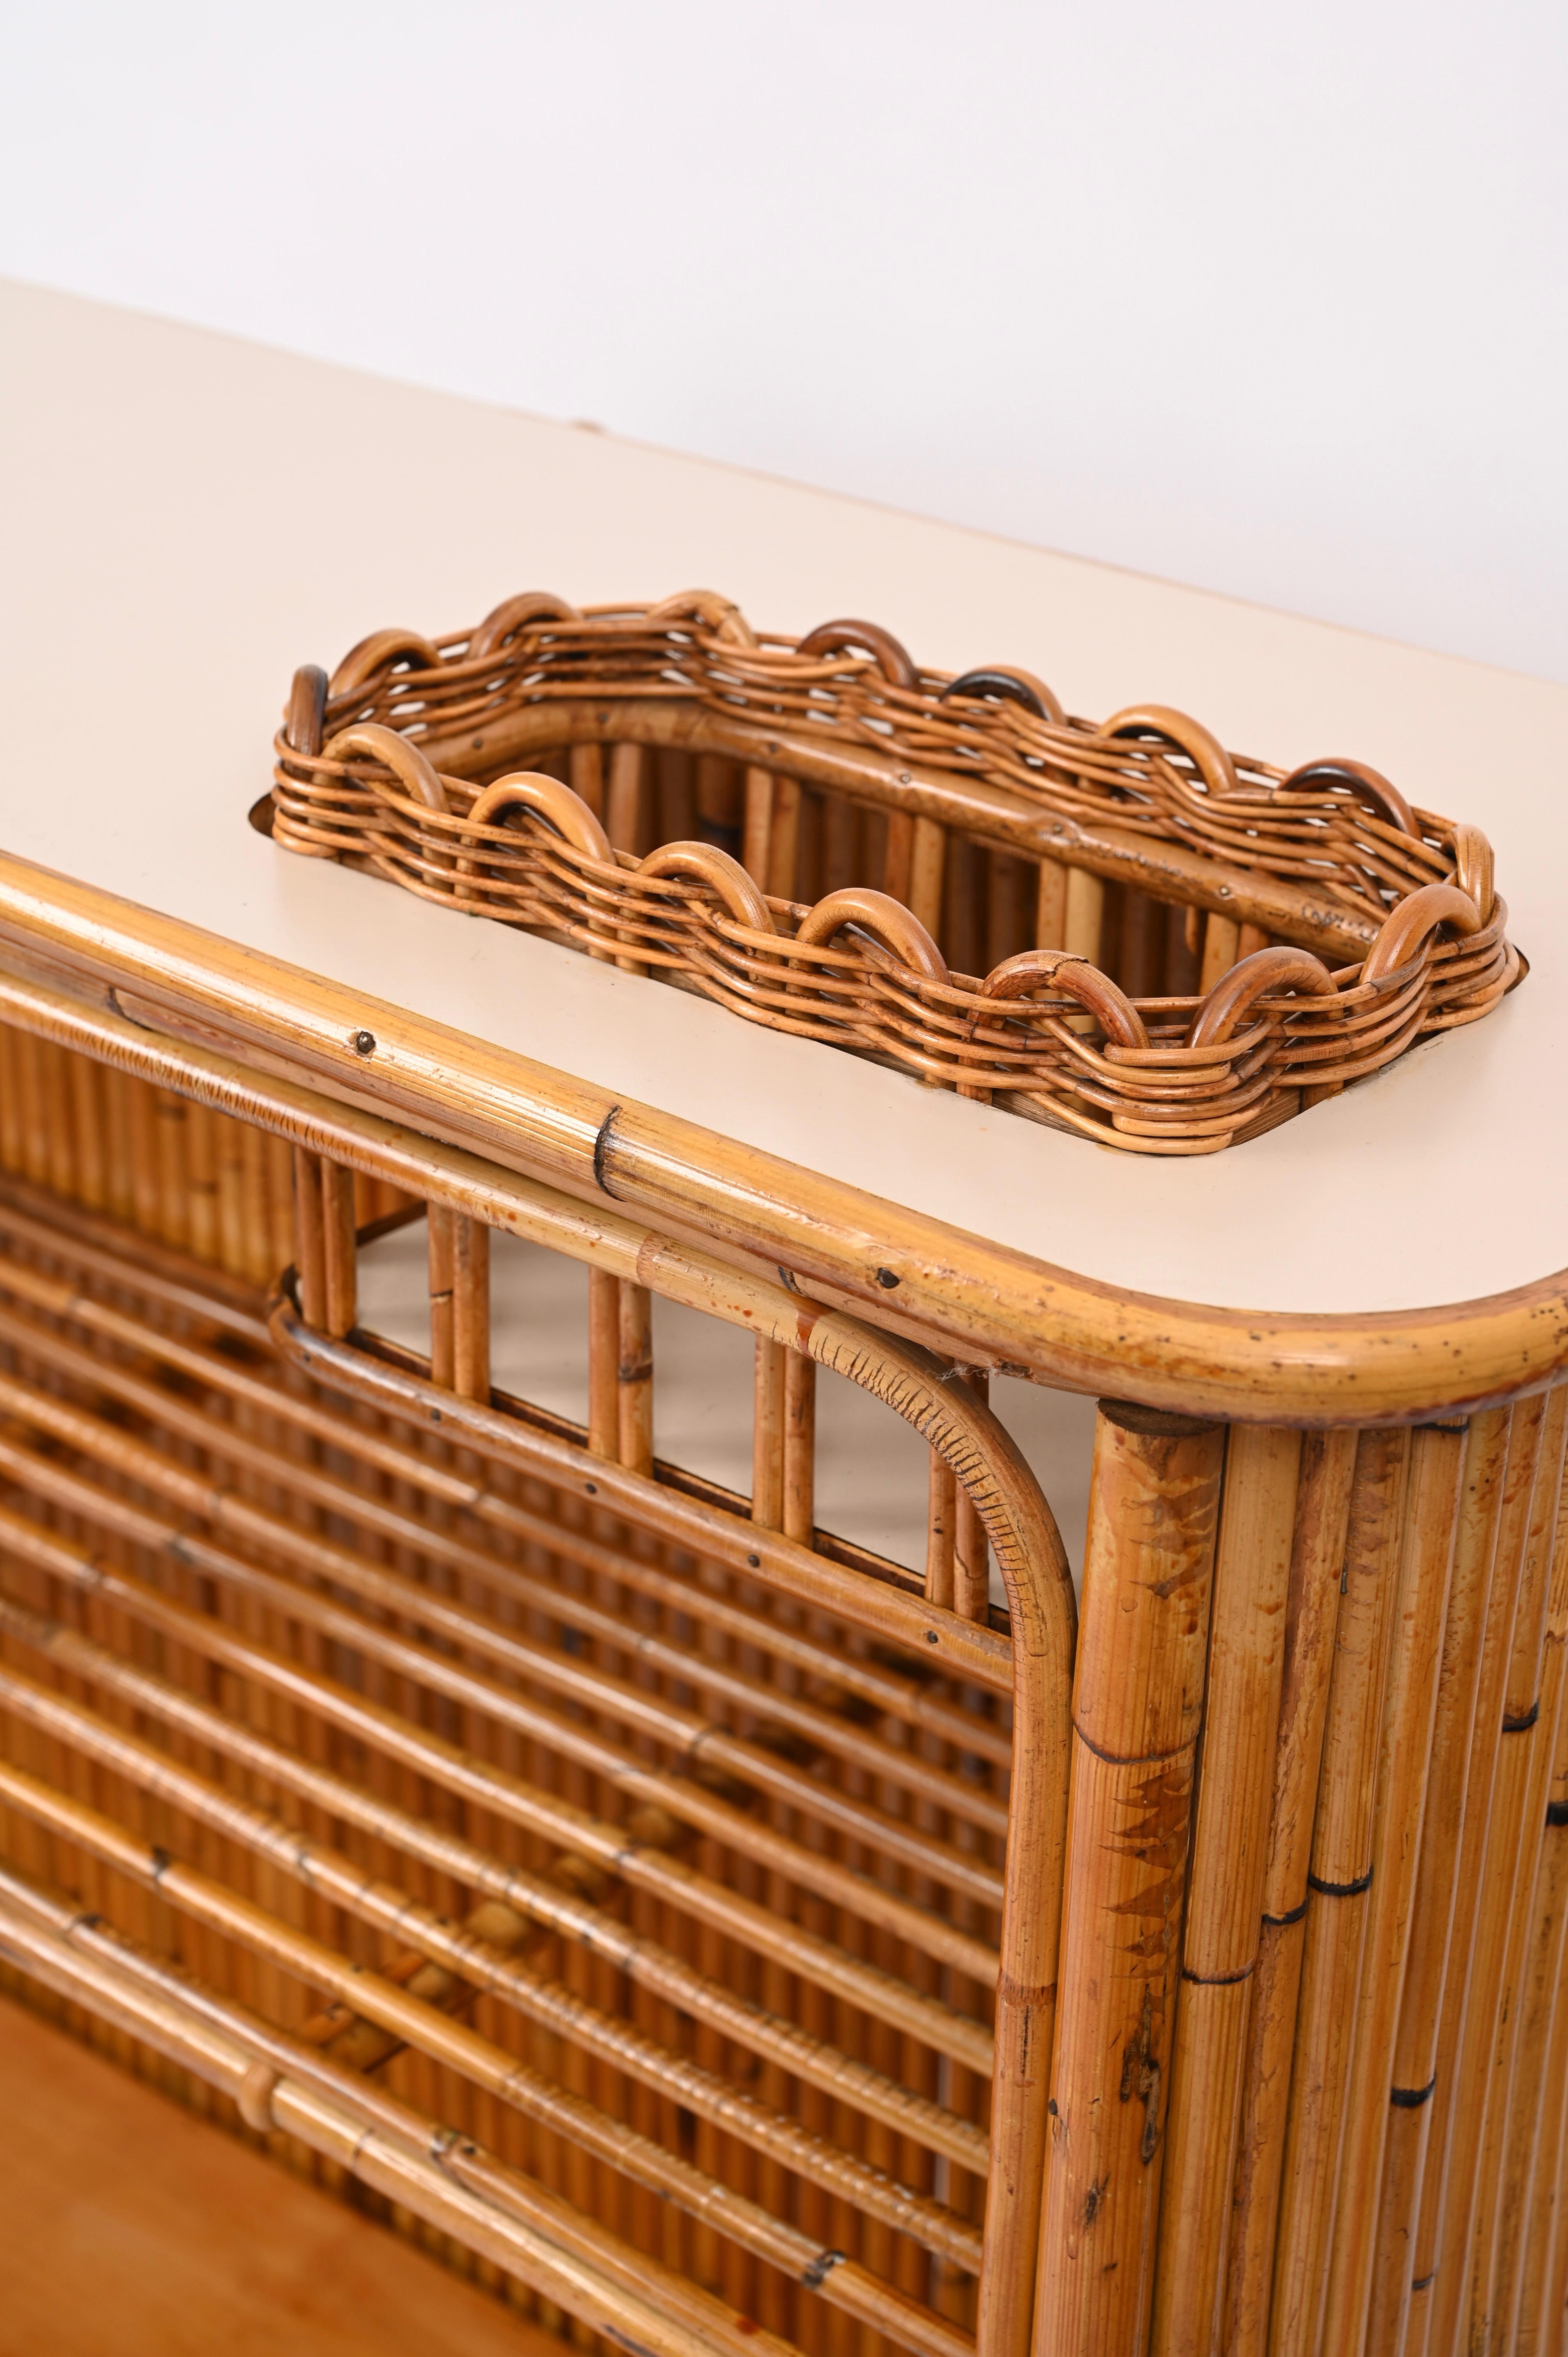 Italian Dry Bar with Two Stools in Rattan, Bamboo and Wicker by Tito Agnoli, Italy 1950s For Sale